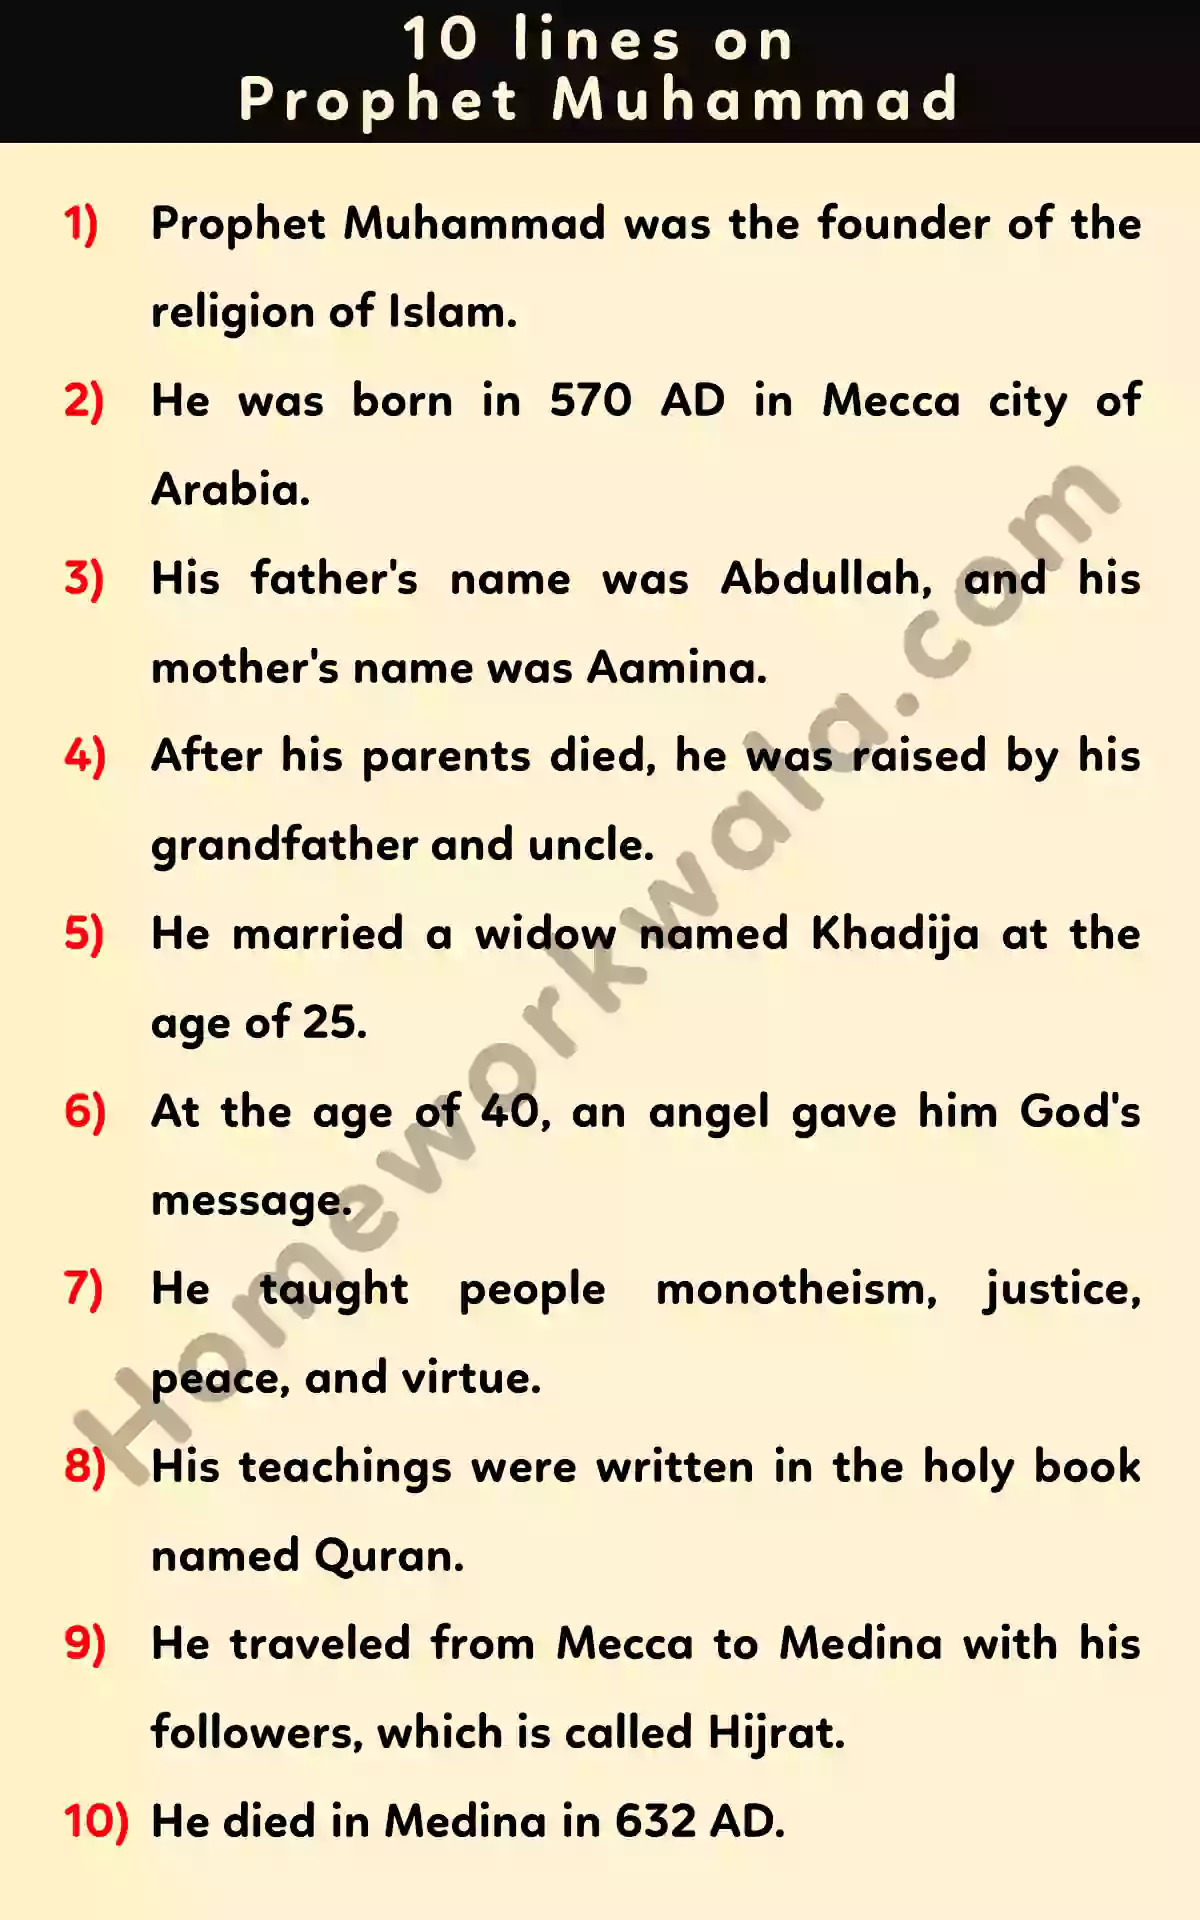 10 lines about Prophet Muhammad